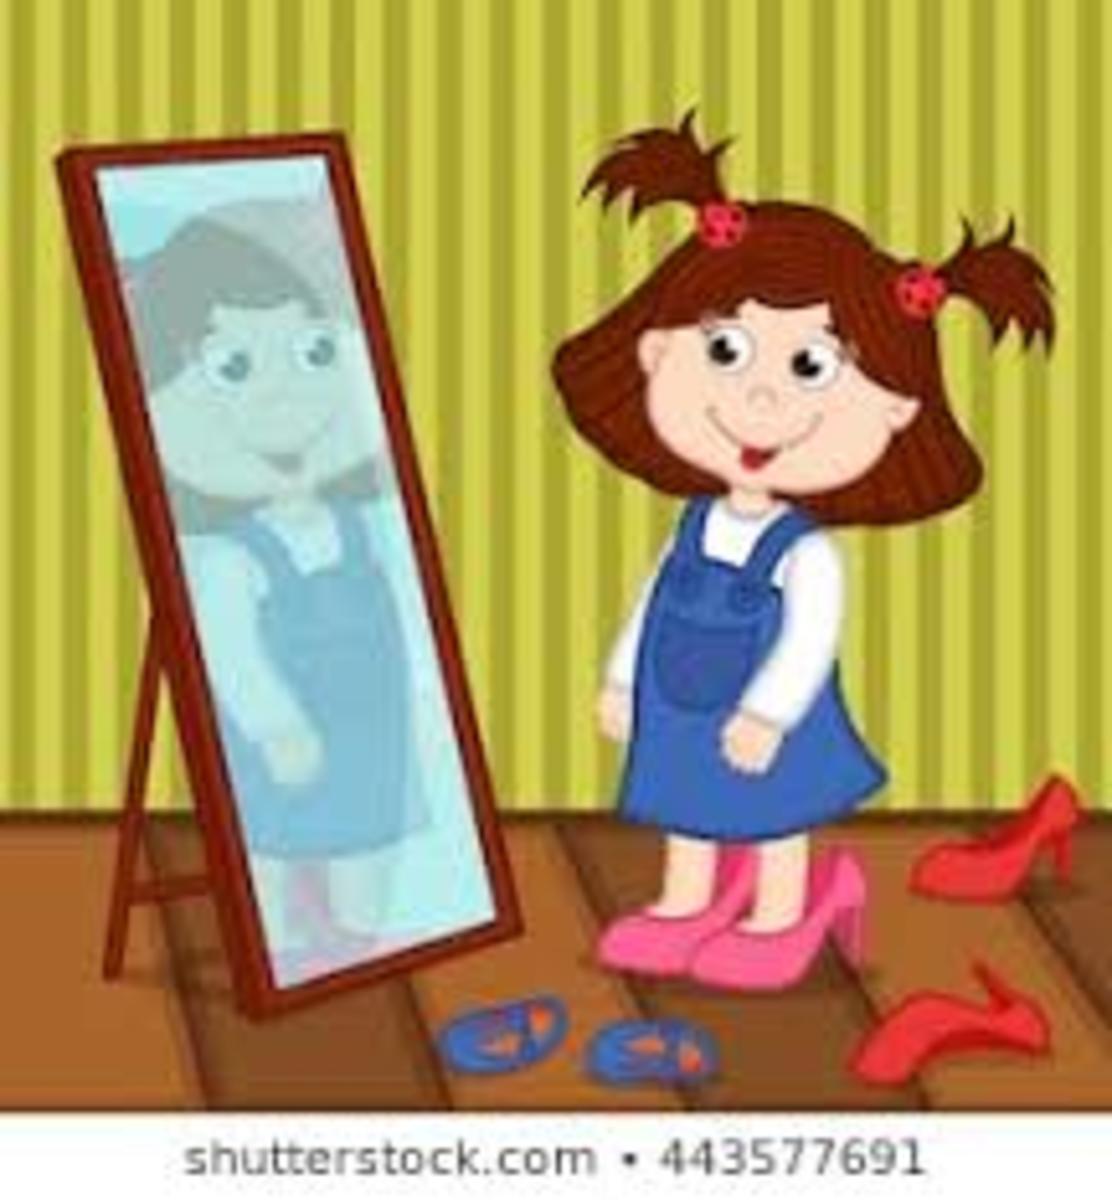 mirror-mirror-on-the-wall-a-kids-poem